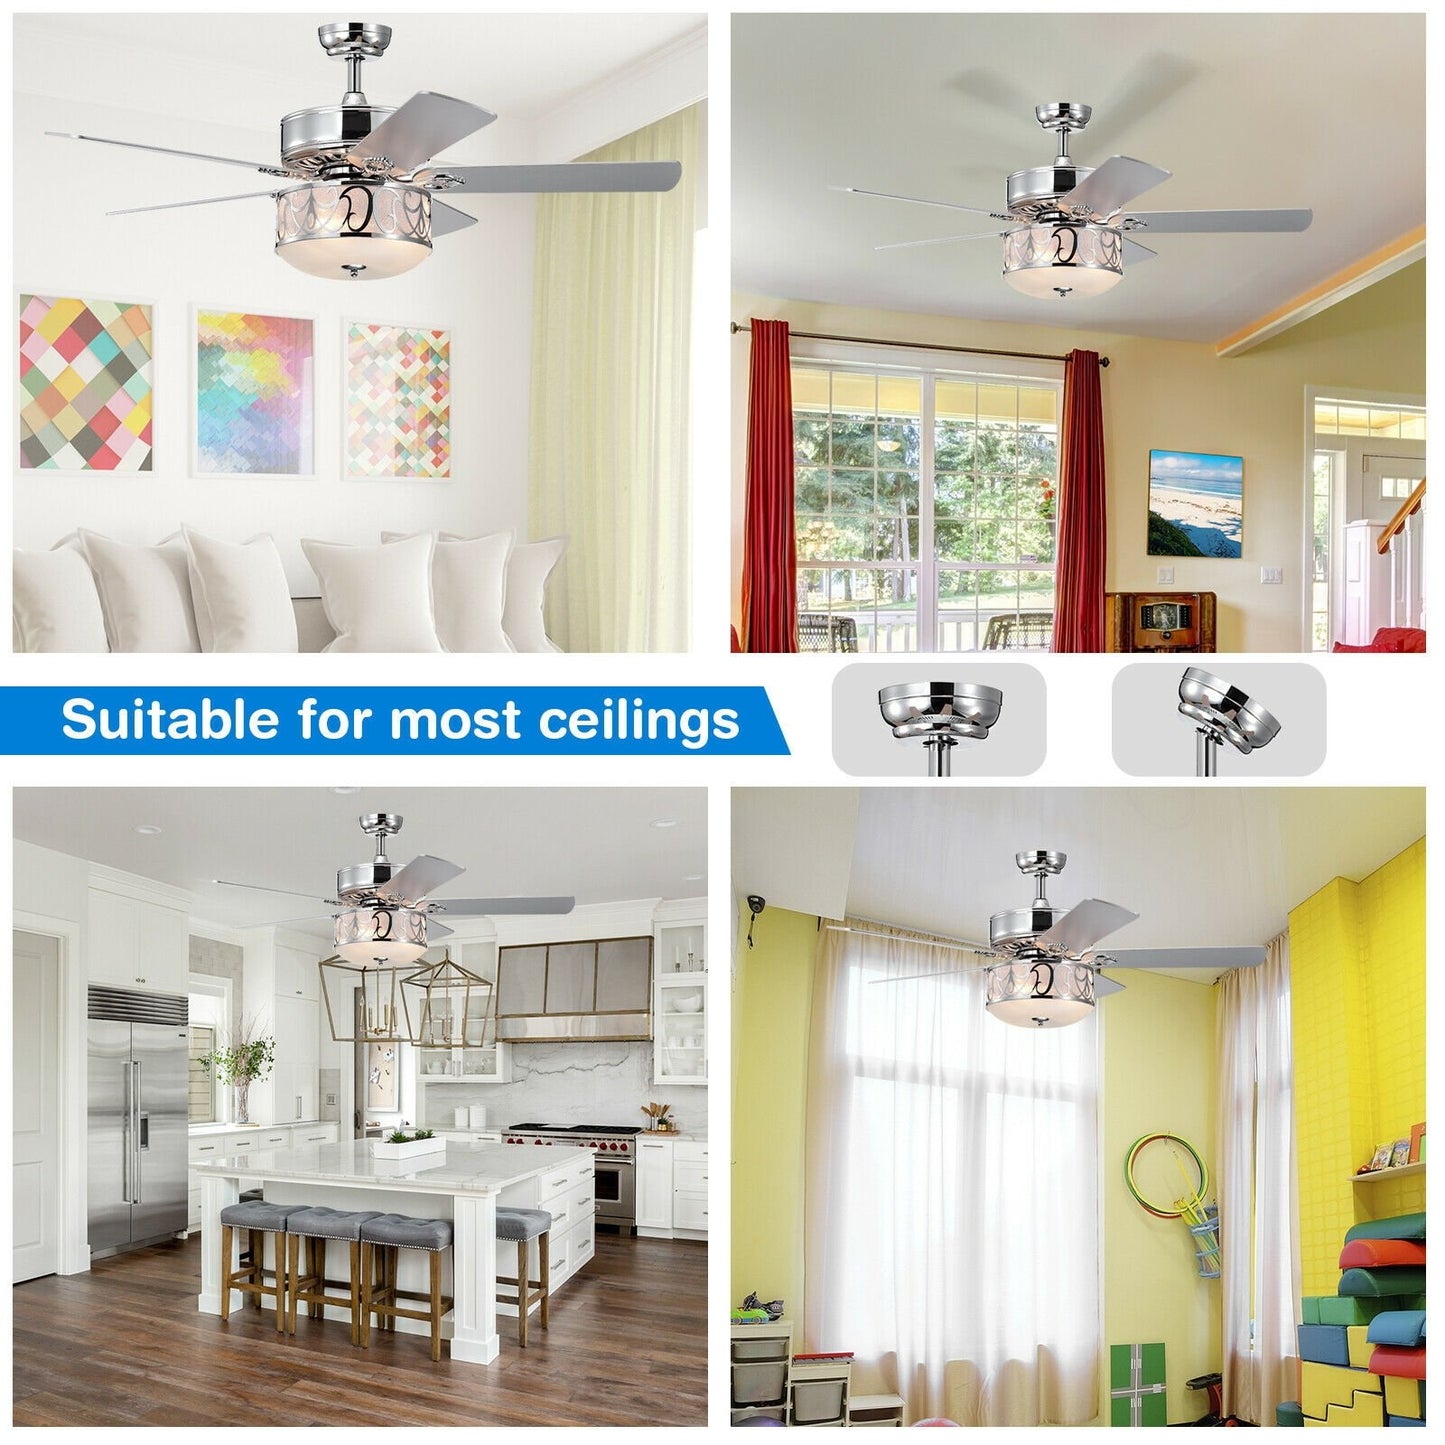 52 Inch Ceiling Fan with Light Reversible Blade and Adjustable Speed, Silver